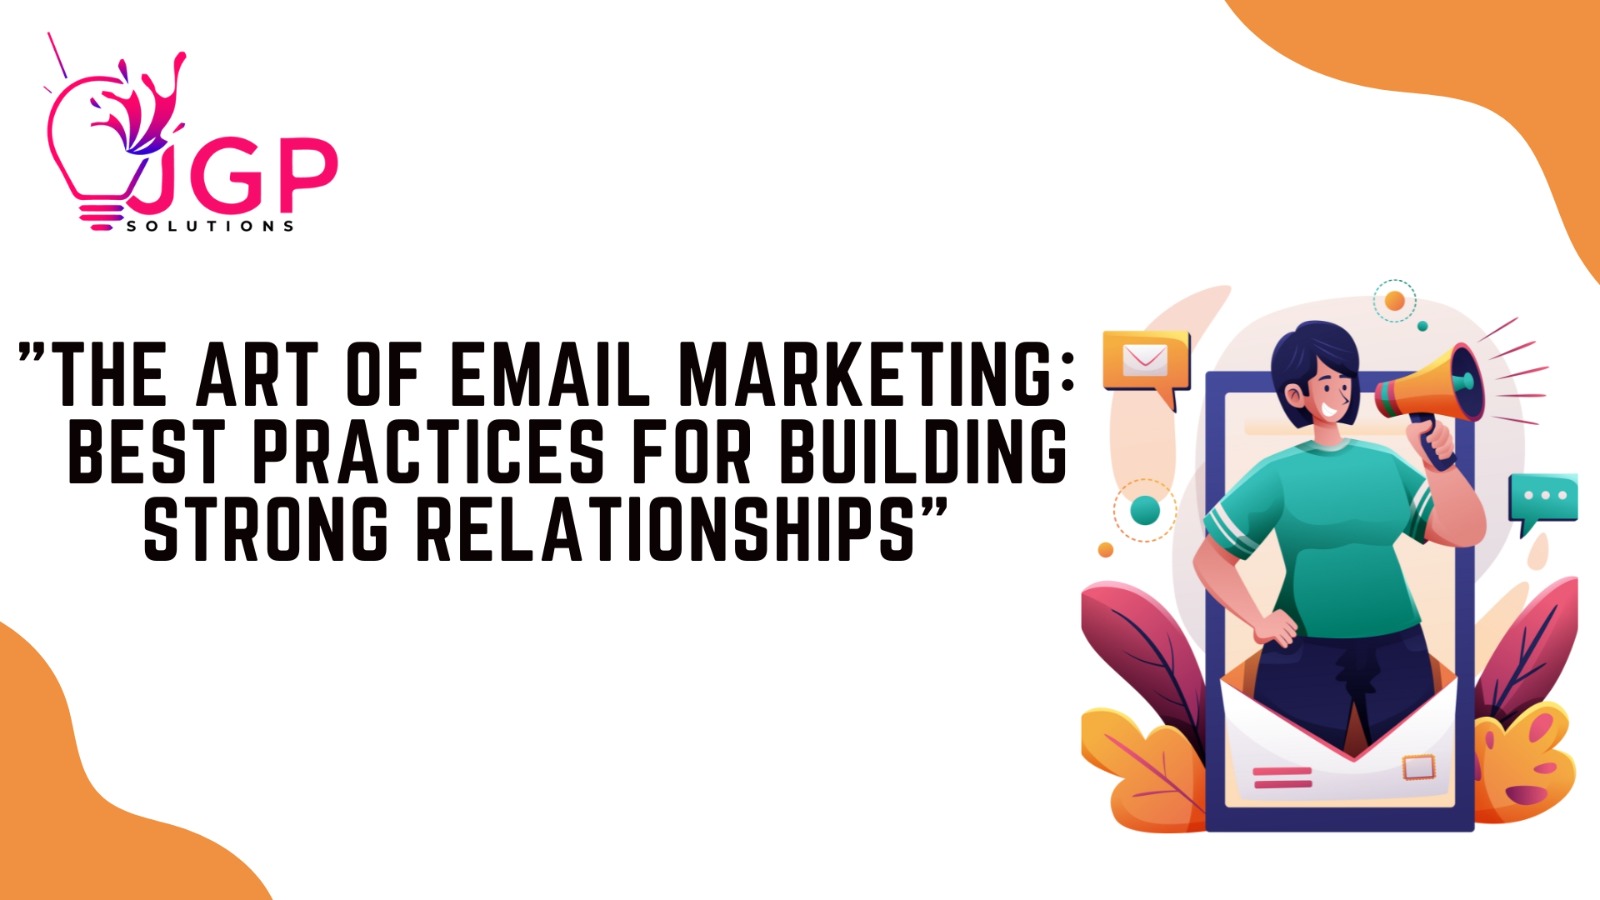 The Art of Email Marketing: Best Practices for Building Strong Relationships